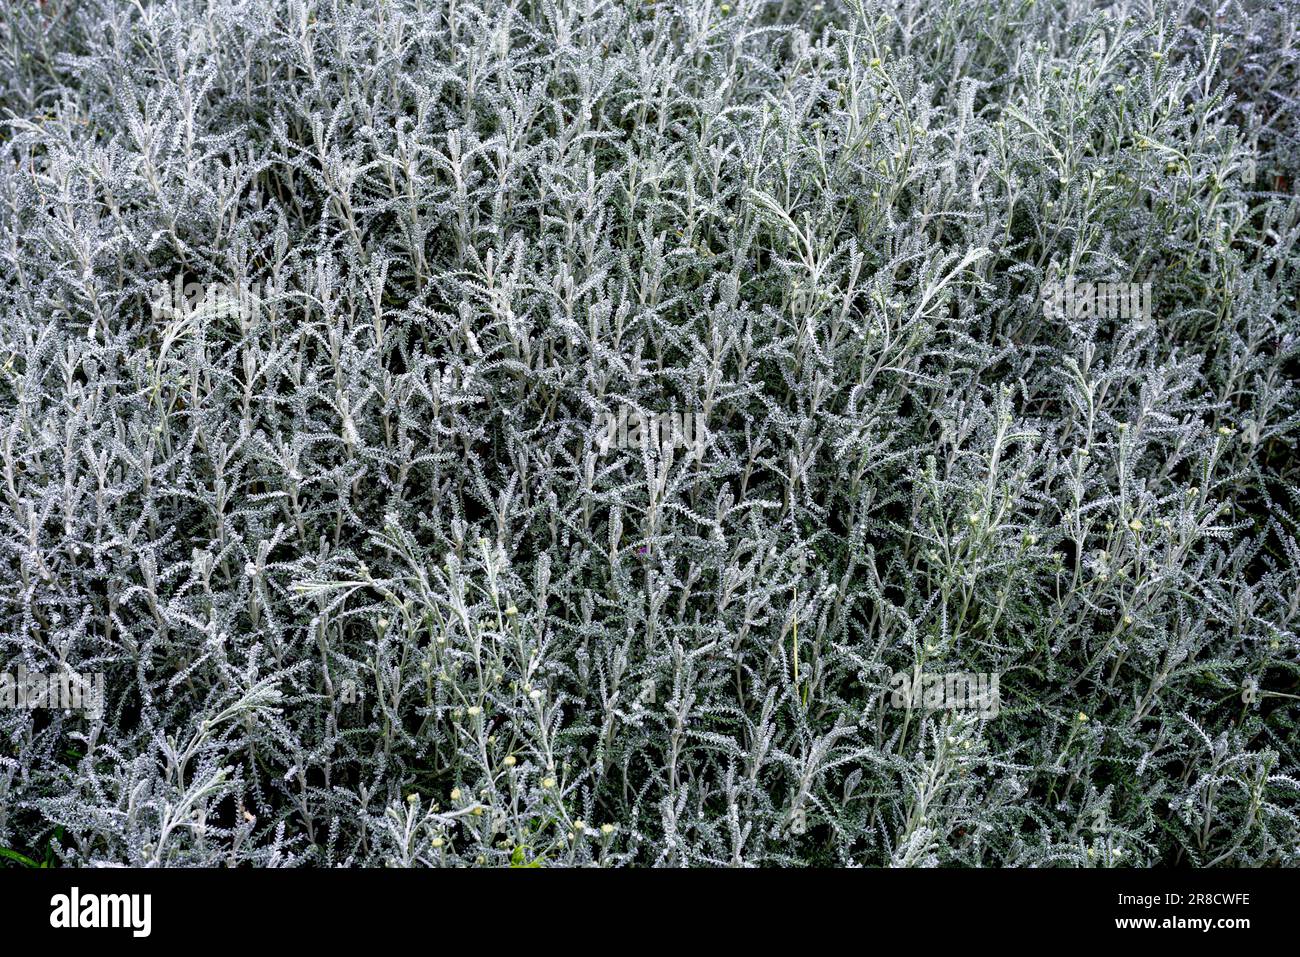 Santolina chamaecyparissus. Santolina chamaecyparissus, known as cotton lavender or lavender-cotton, is a species of flowering plant in the family Ast Stock Photo